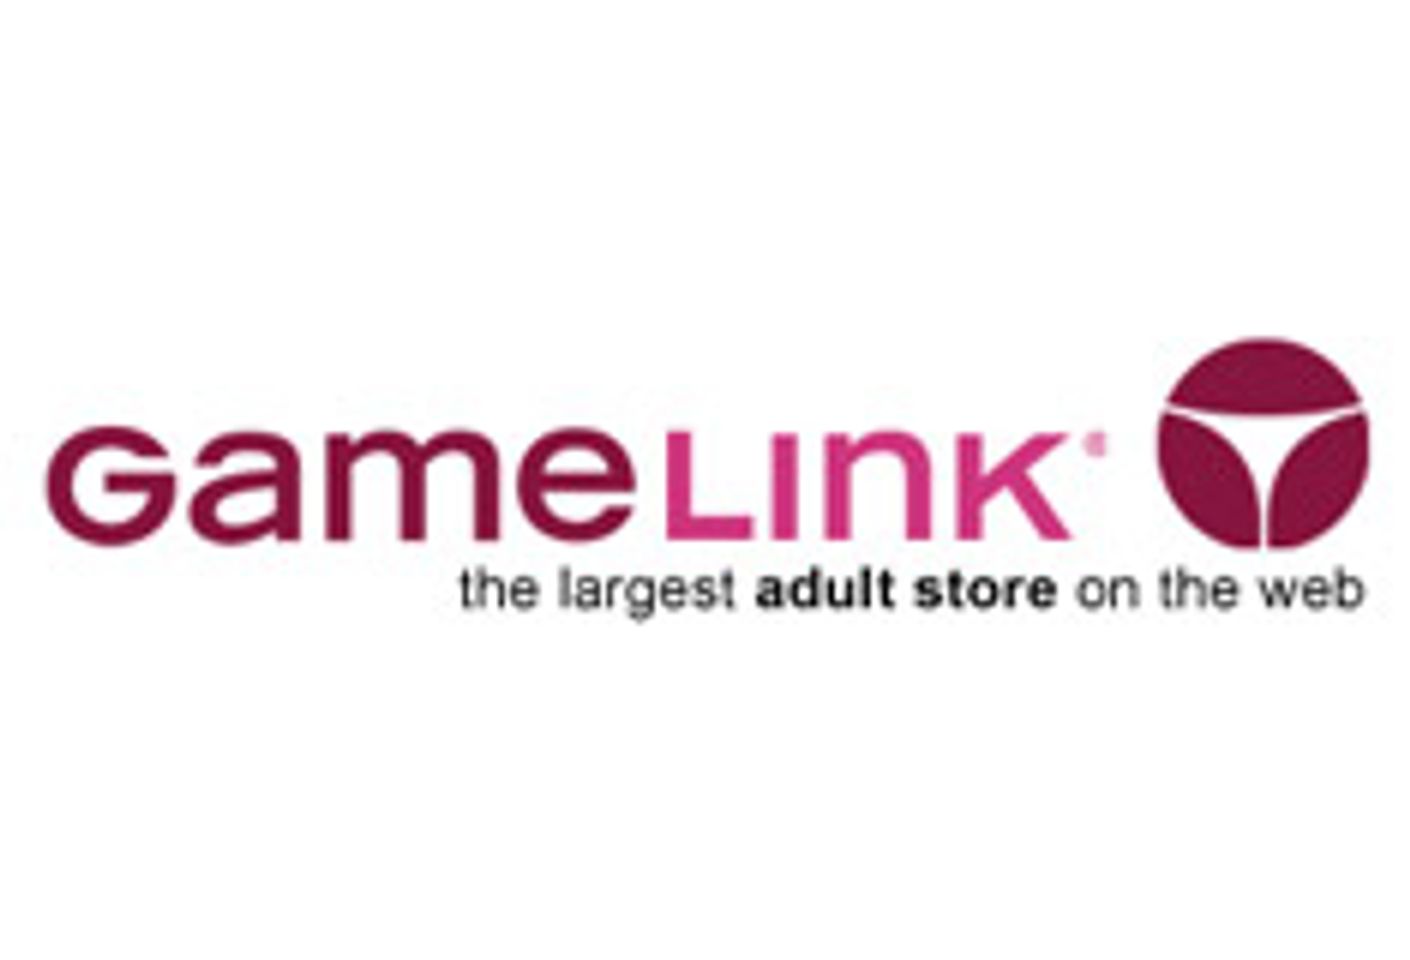 GameLink Aims for Site Expansion